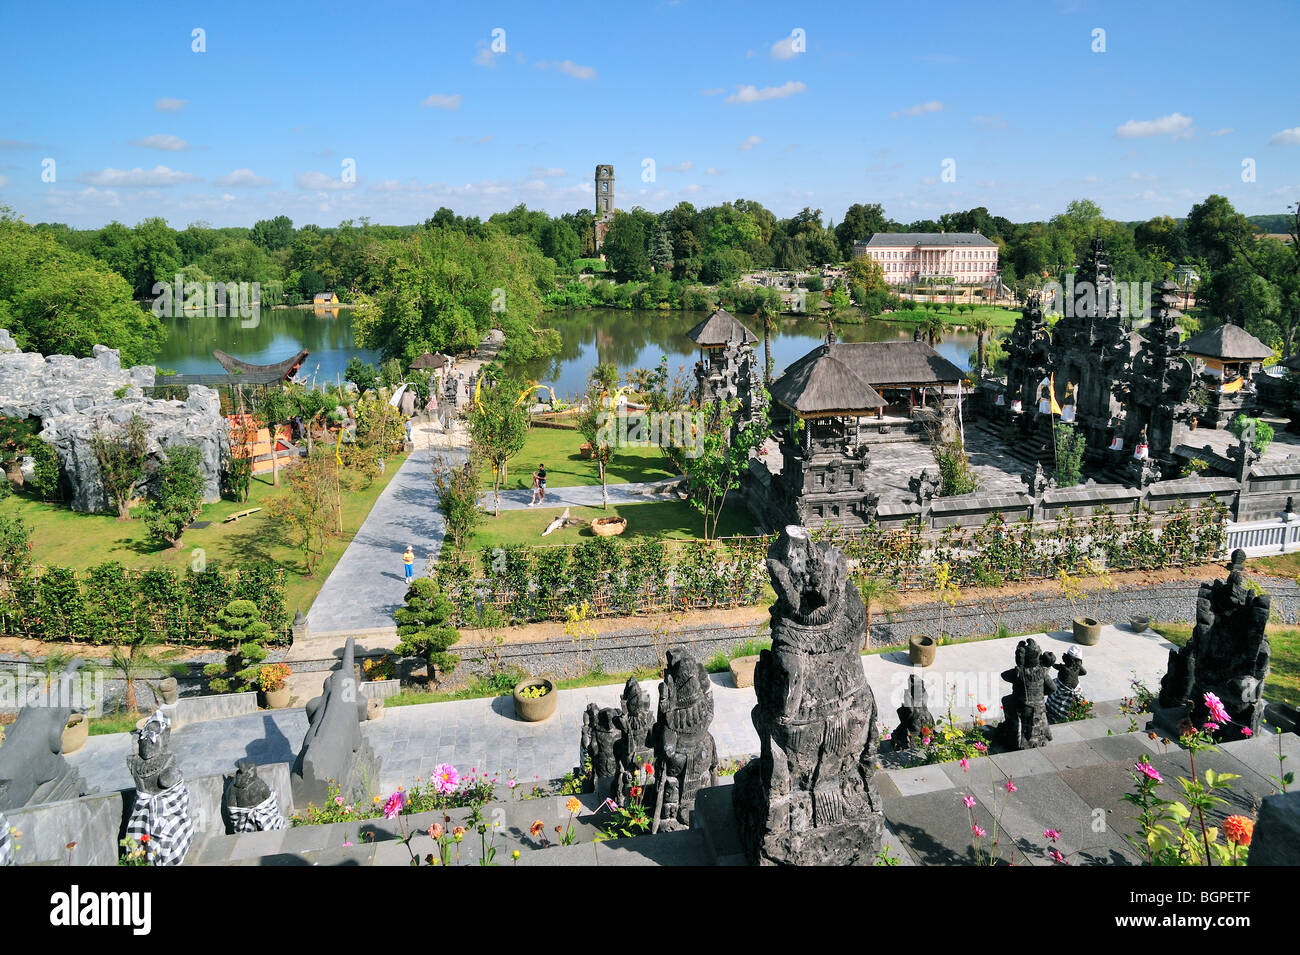 View from the Ganesha Temple over the Indonesian garden at the theme park Pairi Daiza, Belgium Stock Photo